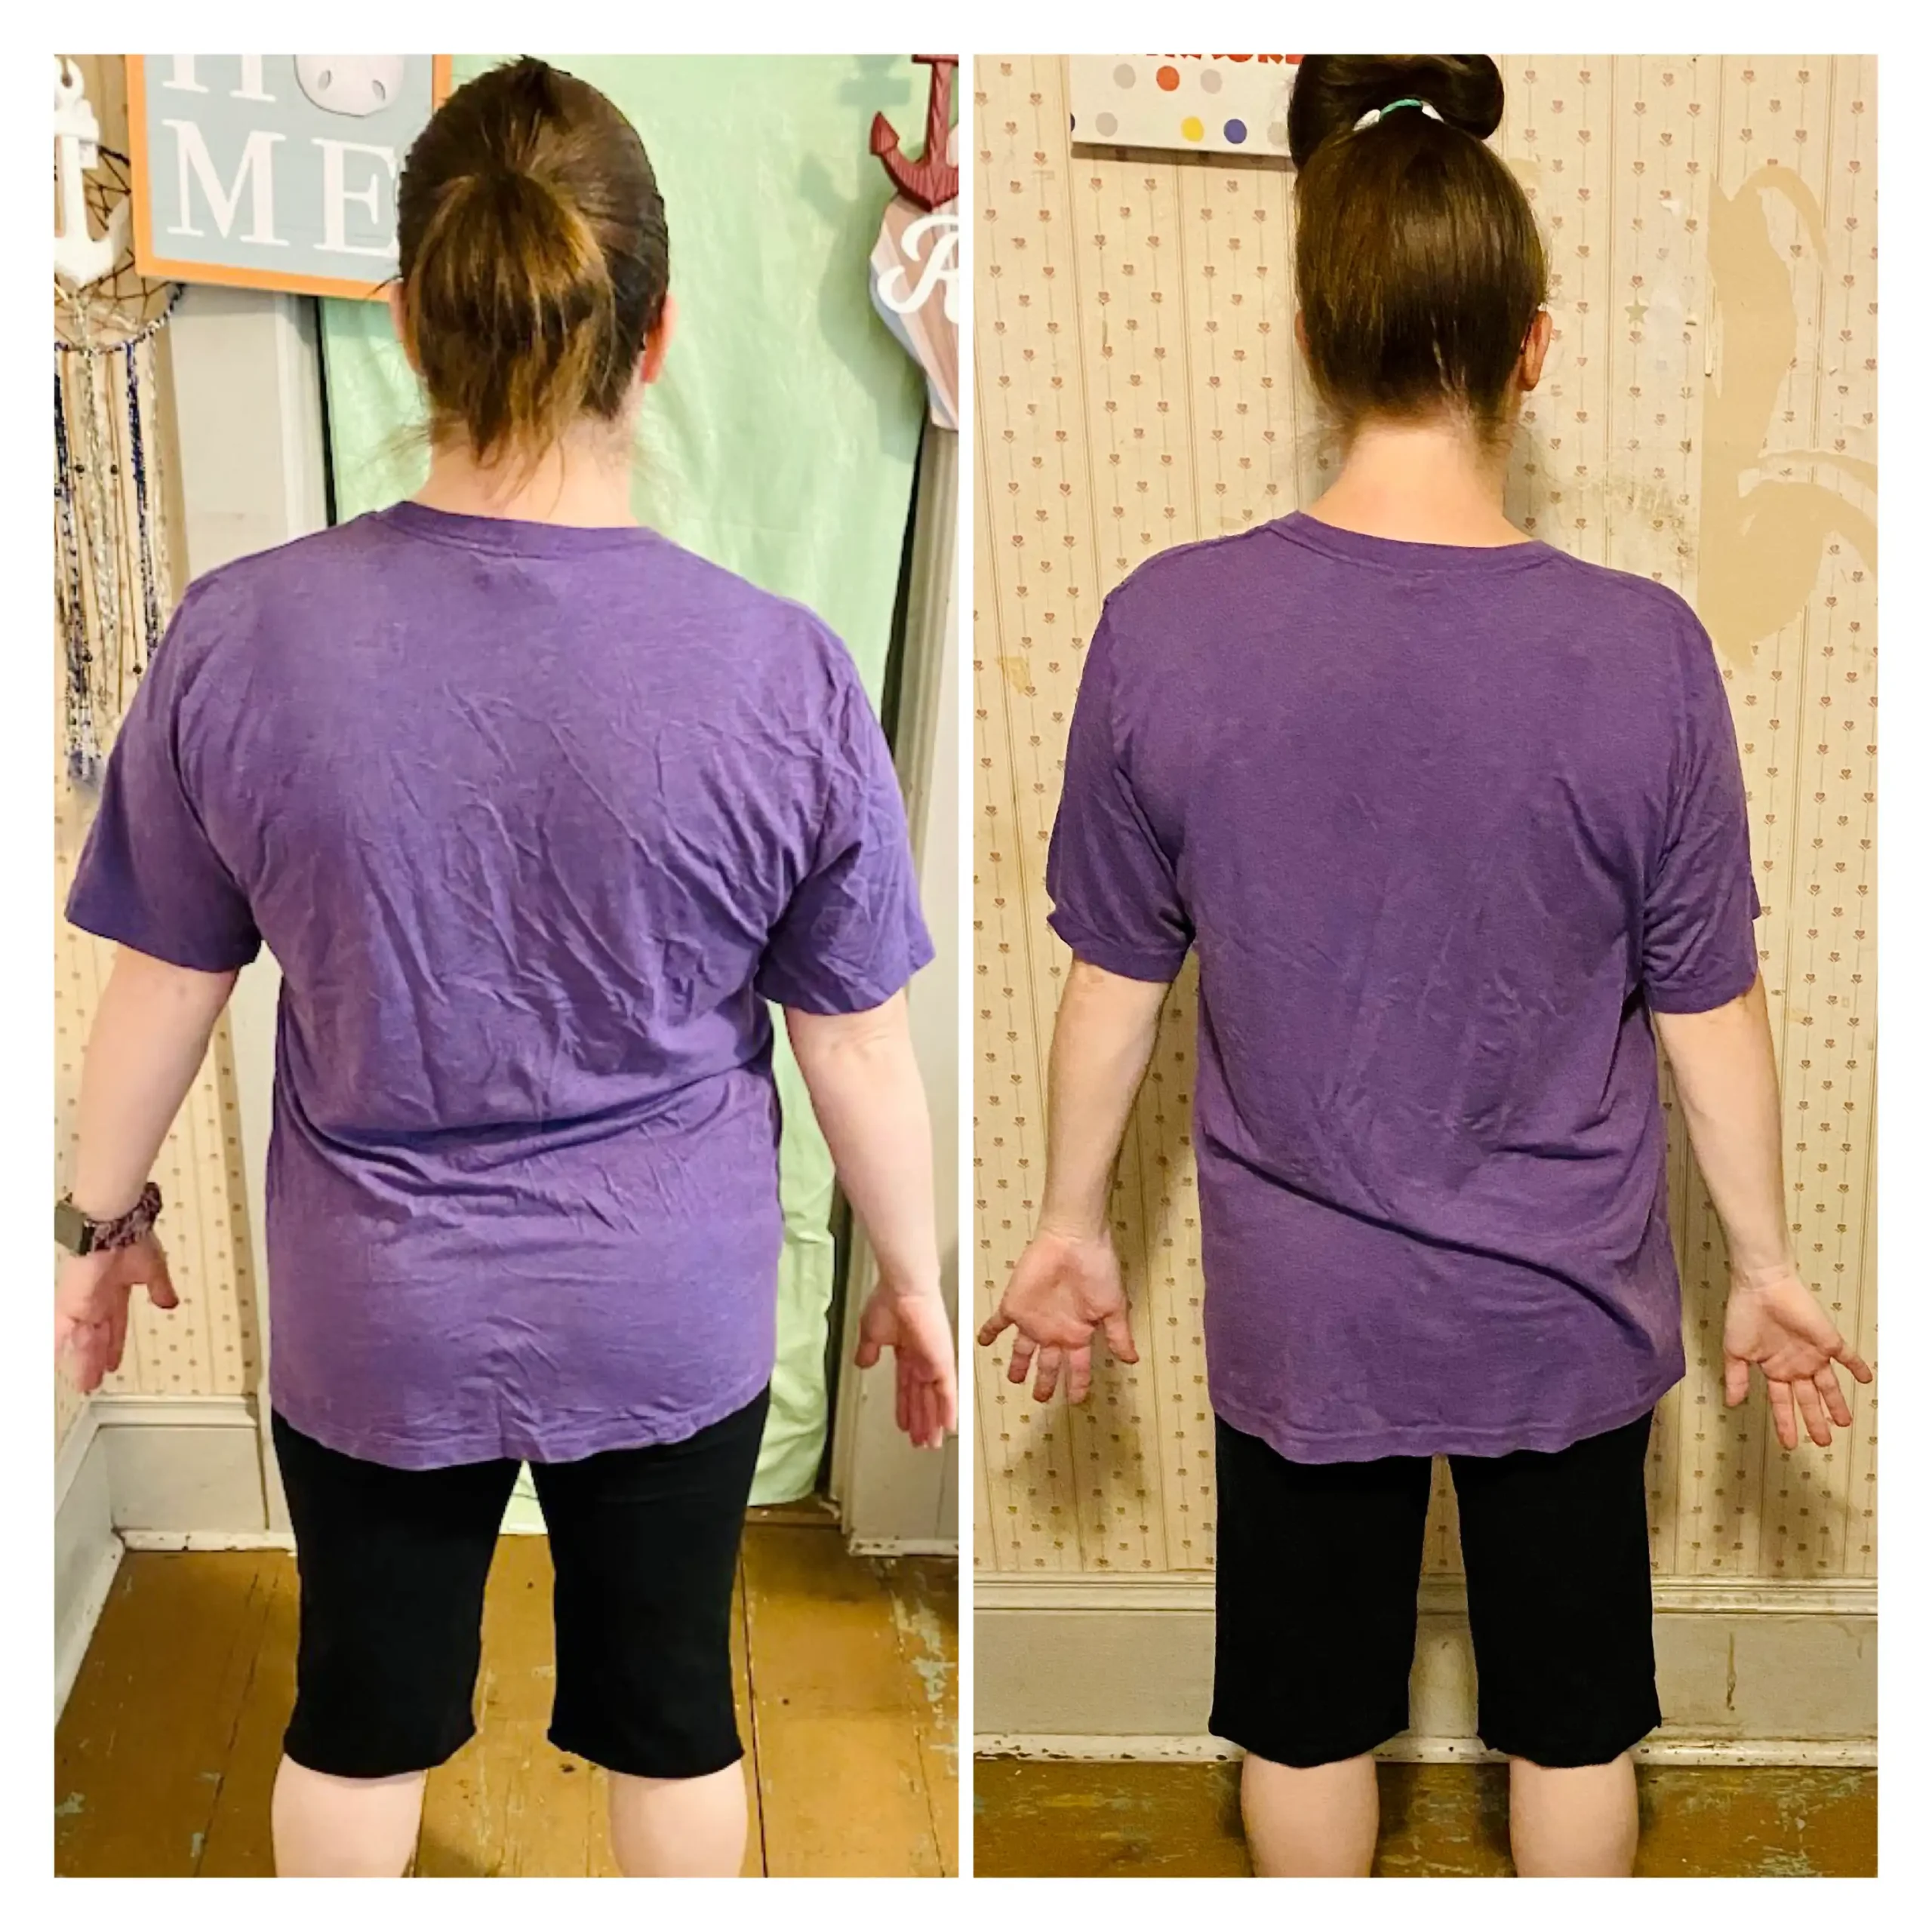 Nicole before and after weight loss back view